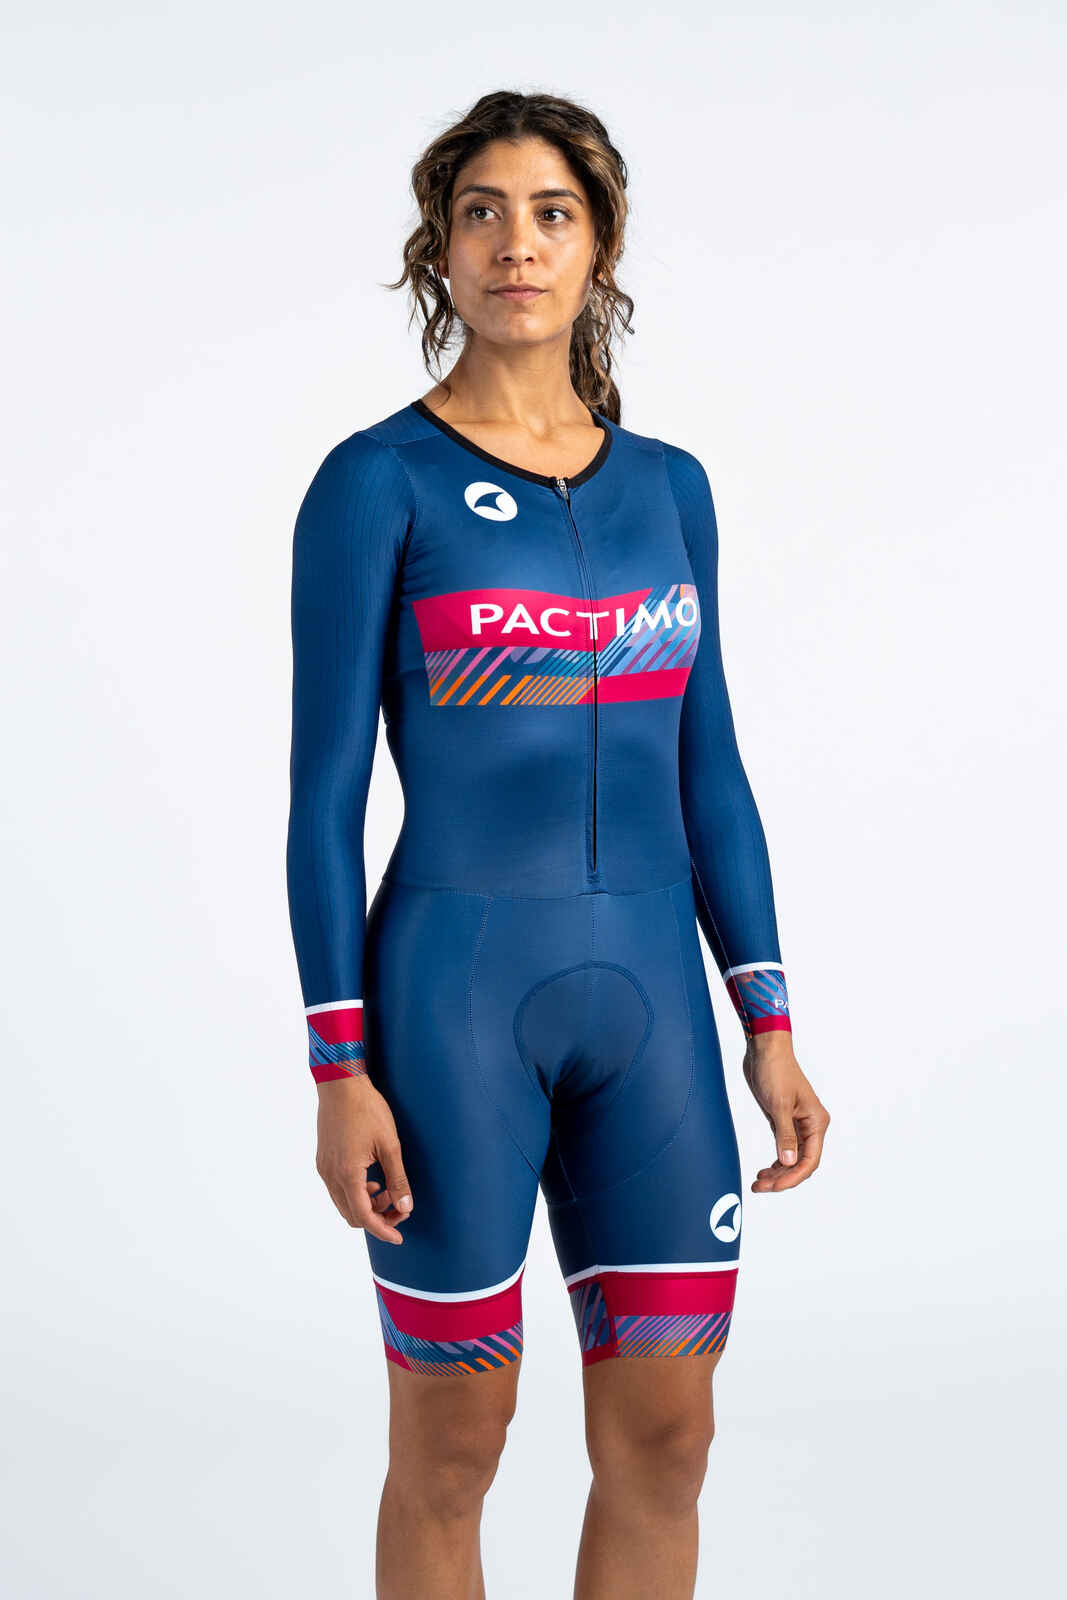 Women's Custom Cycling Skinsuit - Fully Printable Long Sleeve Front View #color-options_fully-printed